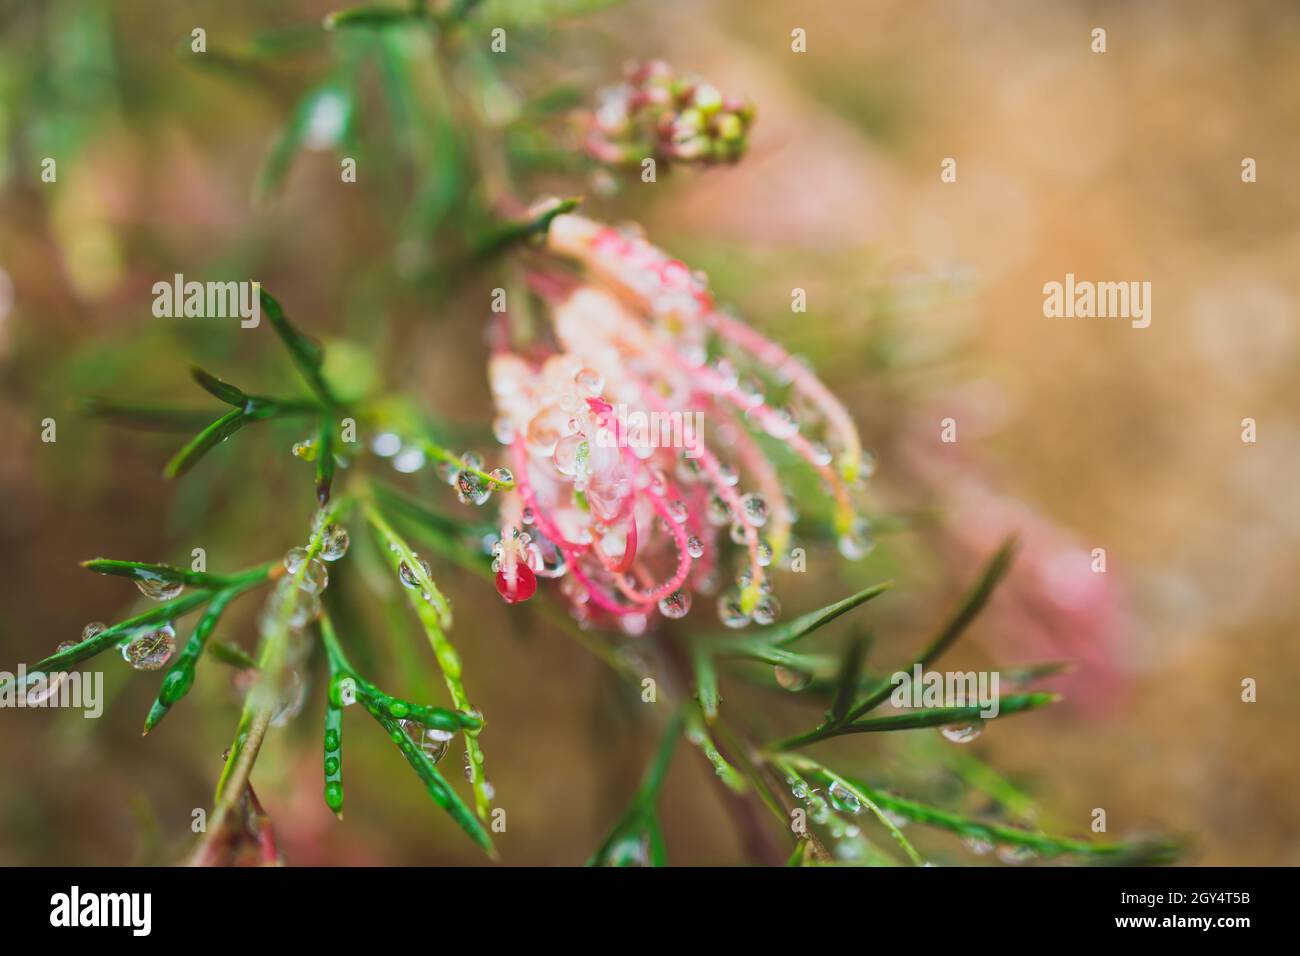 native Australian grevillea semperflorens plant with yelow and pink flowers outdoor in beautiful tropical backyard shot at shallow depth of field Stock Photo